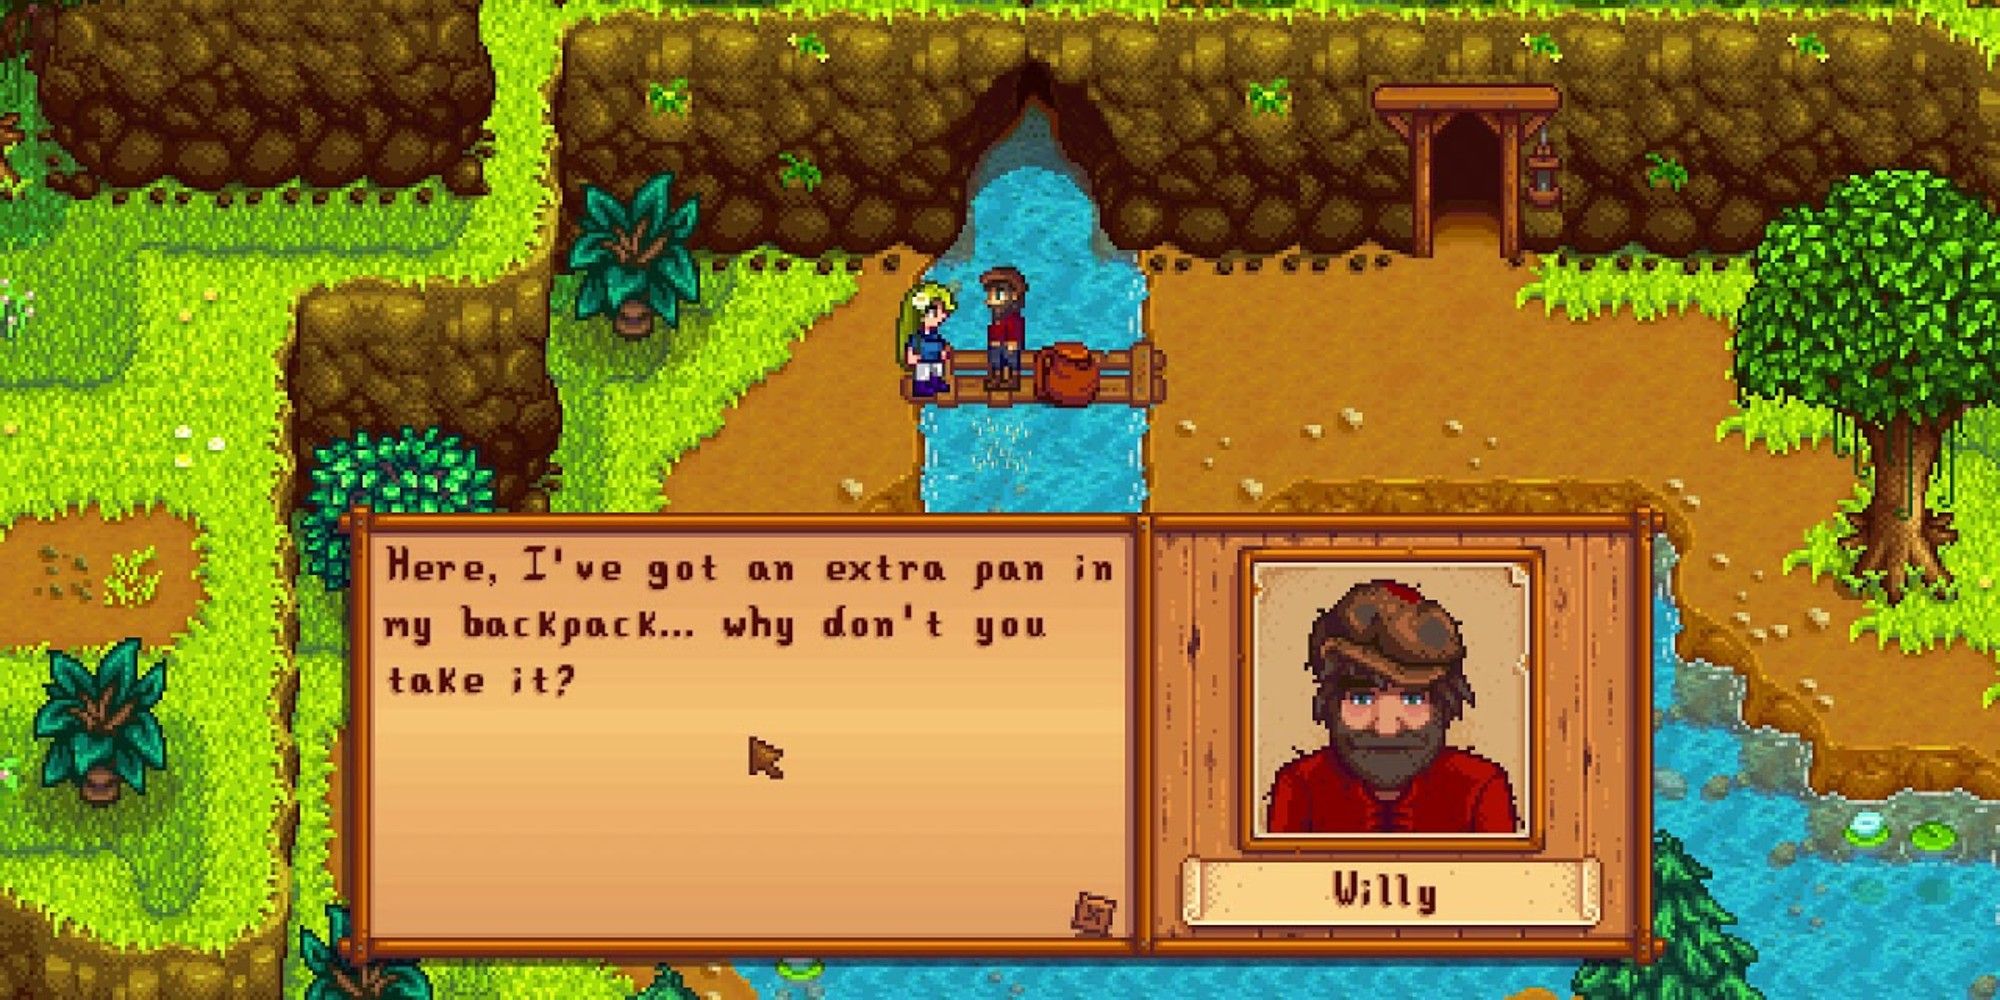 cutscene with willy teaching player to pan